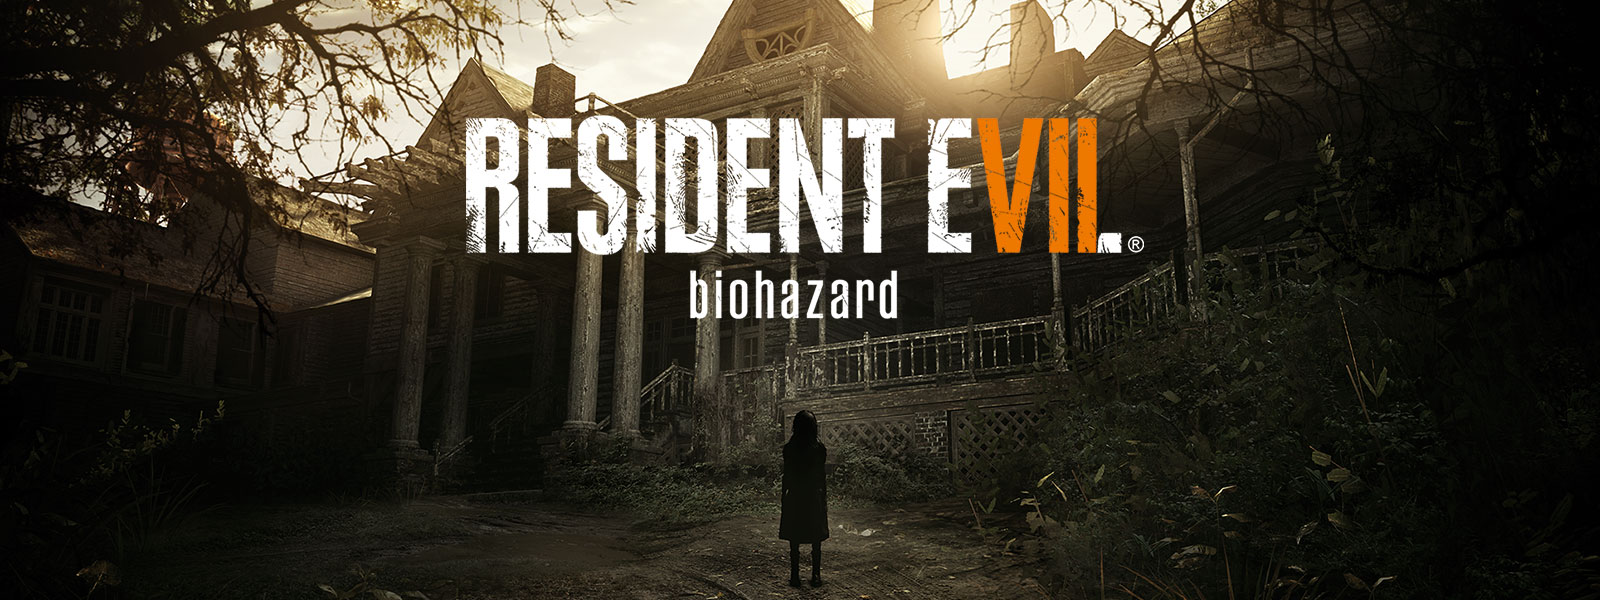 Resident Evil 7 biohazard gold edition box shot over scene of spooky girl standing in front of haunted house